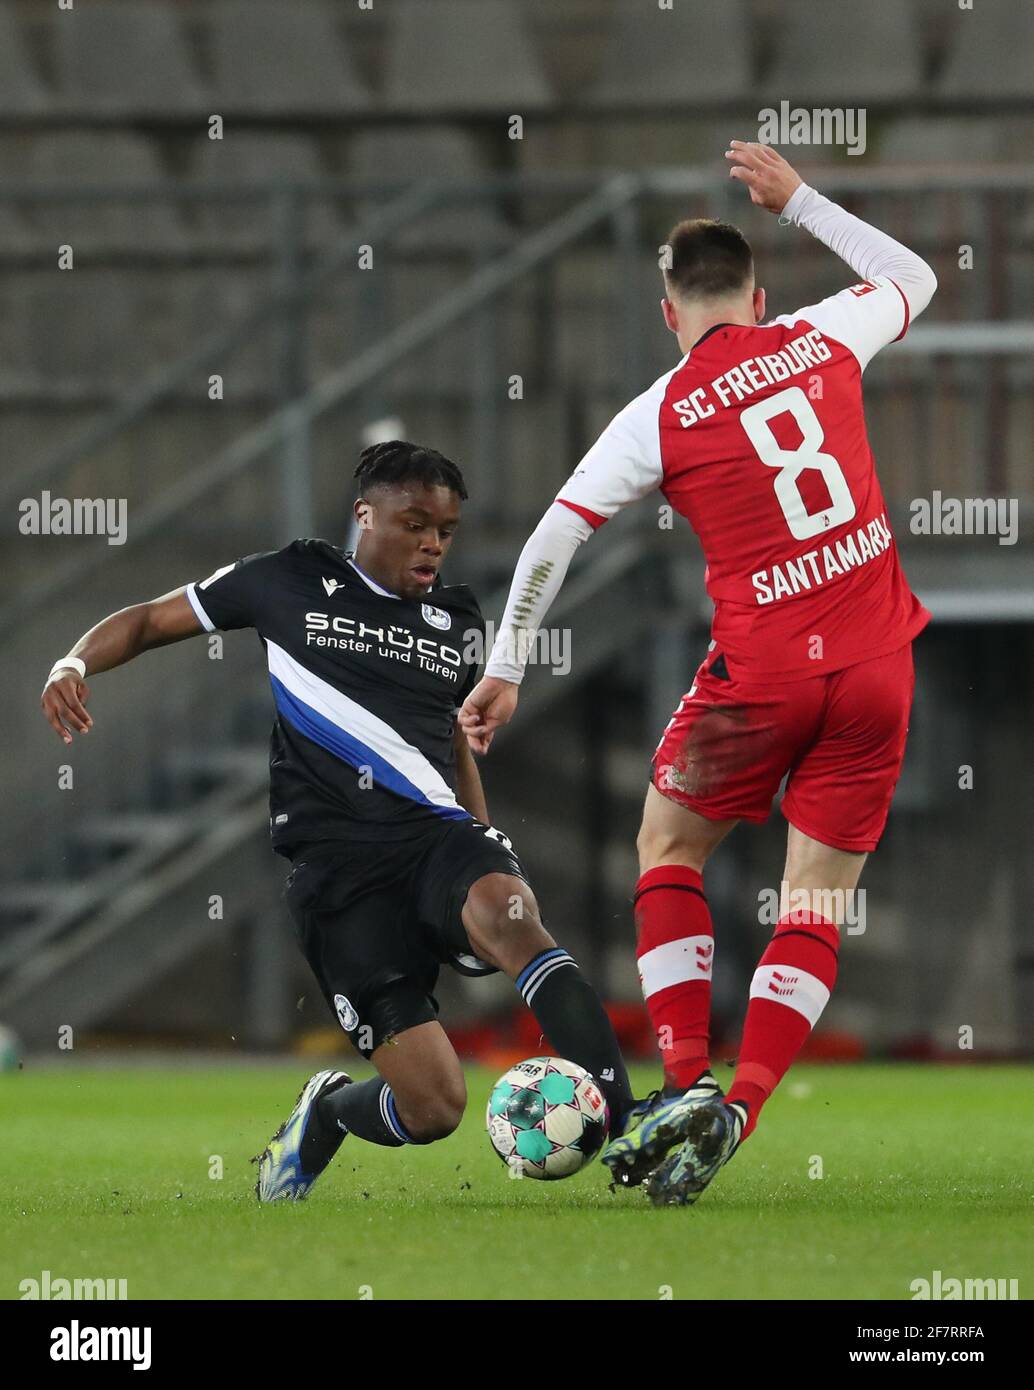 Bielefeld, Germany. 09th Apr, 2021. Football: Bundesliga, Arminia Bielefeld - SC Freiburg, Matchday 28 at Schüco Arena. #Bielefeld's Anderson Lucoqui and Freiburg's Baptiste Santamaría (r) in action. IMPORTANT NOTE: In accordance with the regulations of the DFL Deutsche Fußball Liga and the DFB Deutscher Fußball-Bund, it is prohibited to use or have used photographs taken in the stadium and/or of the match in the form of sequence pictures and/or video-like photo series. Credit: Friso Gentsch/dpa/Alamy Live News Stock Photo